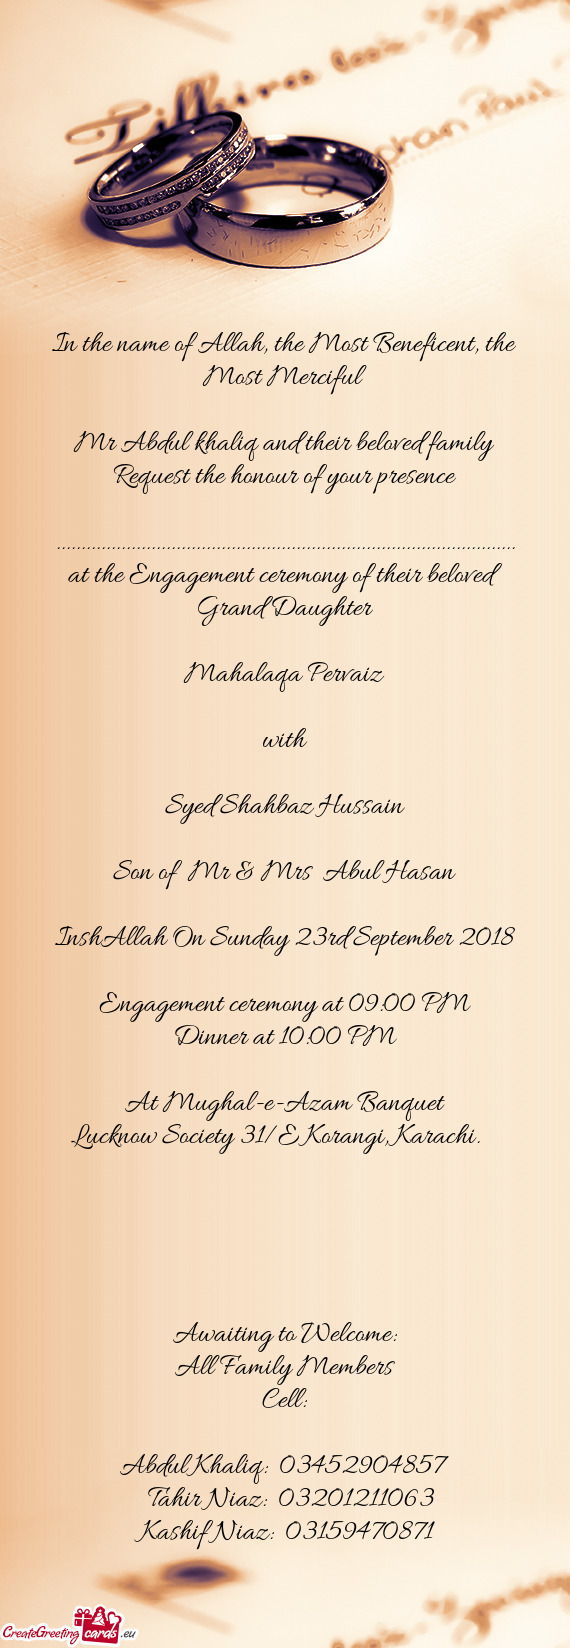 Engagement ceremony at 09:00 PM